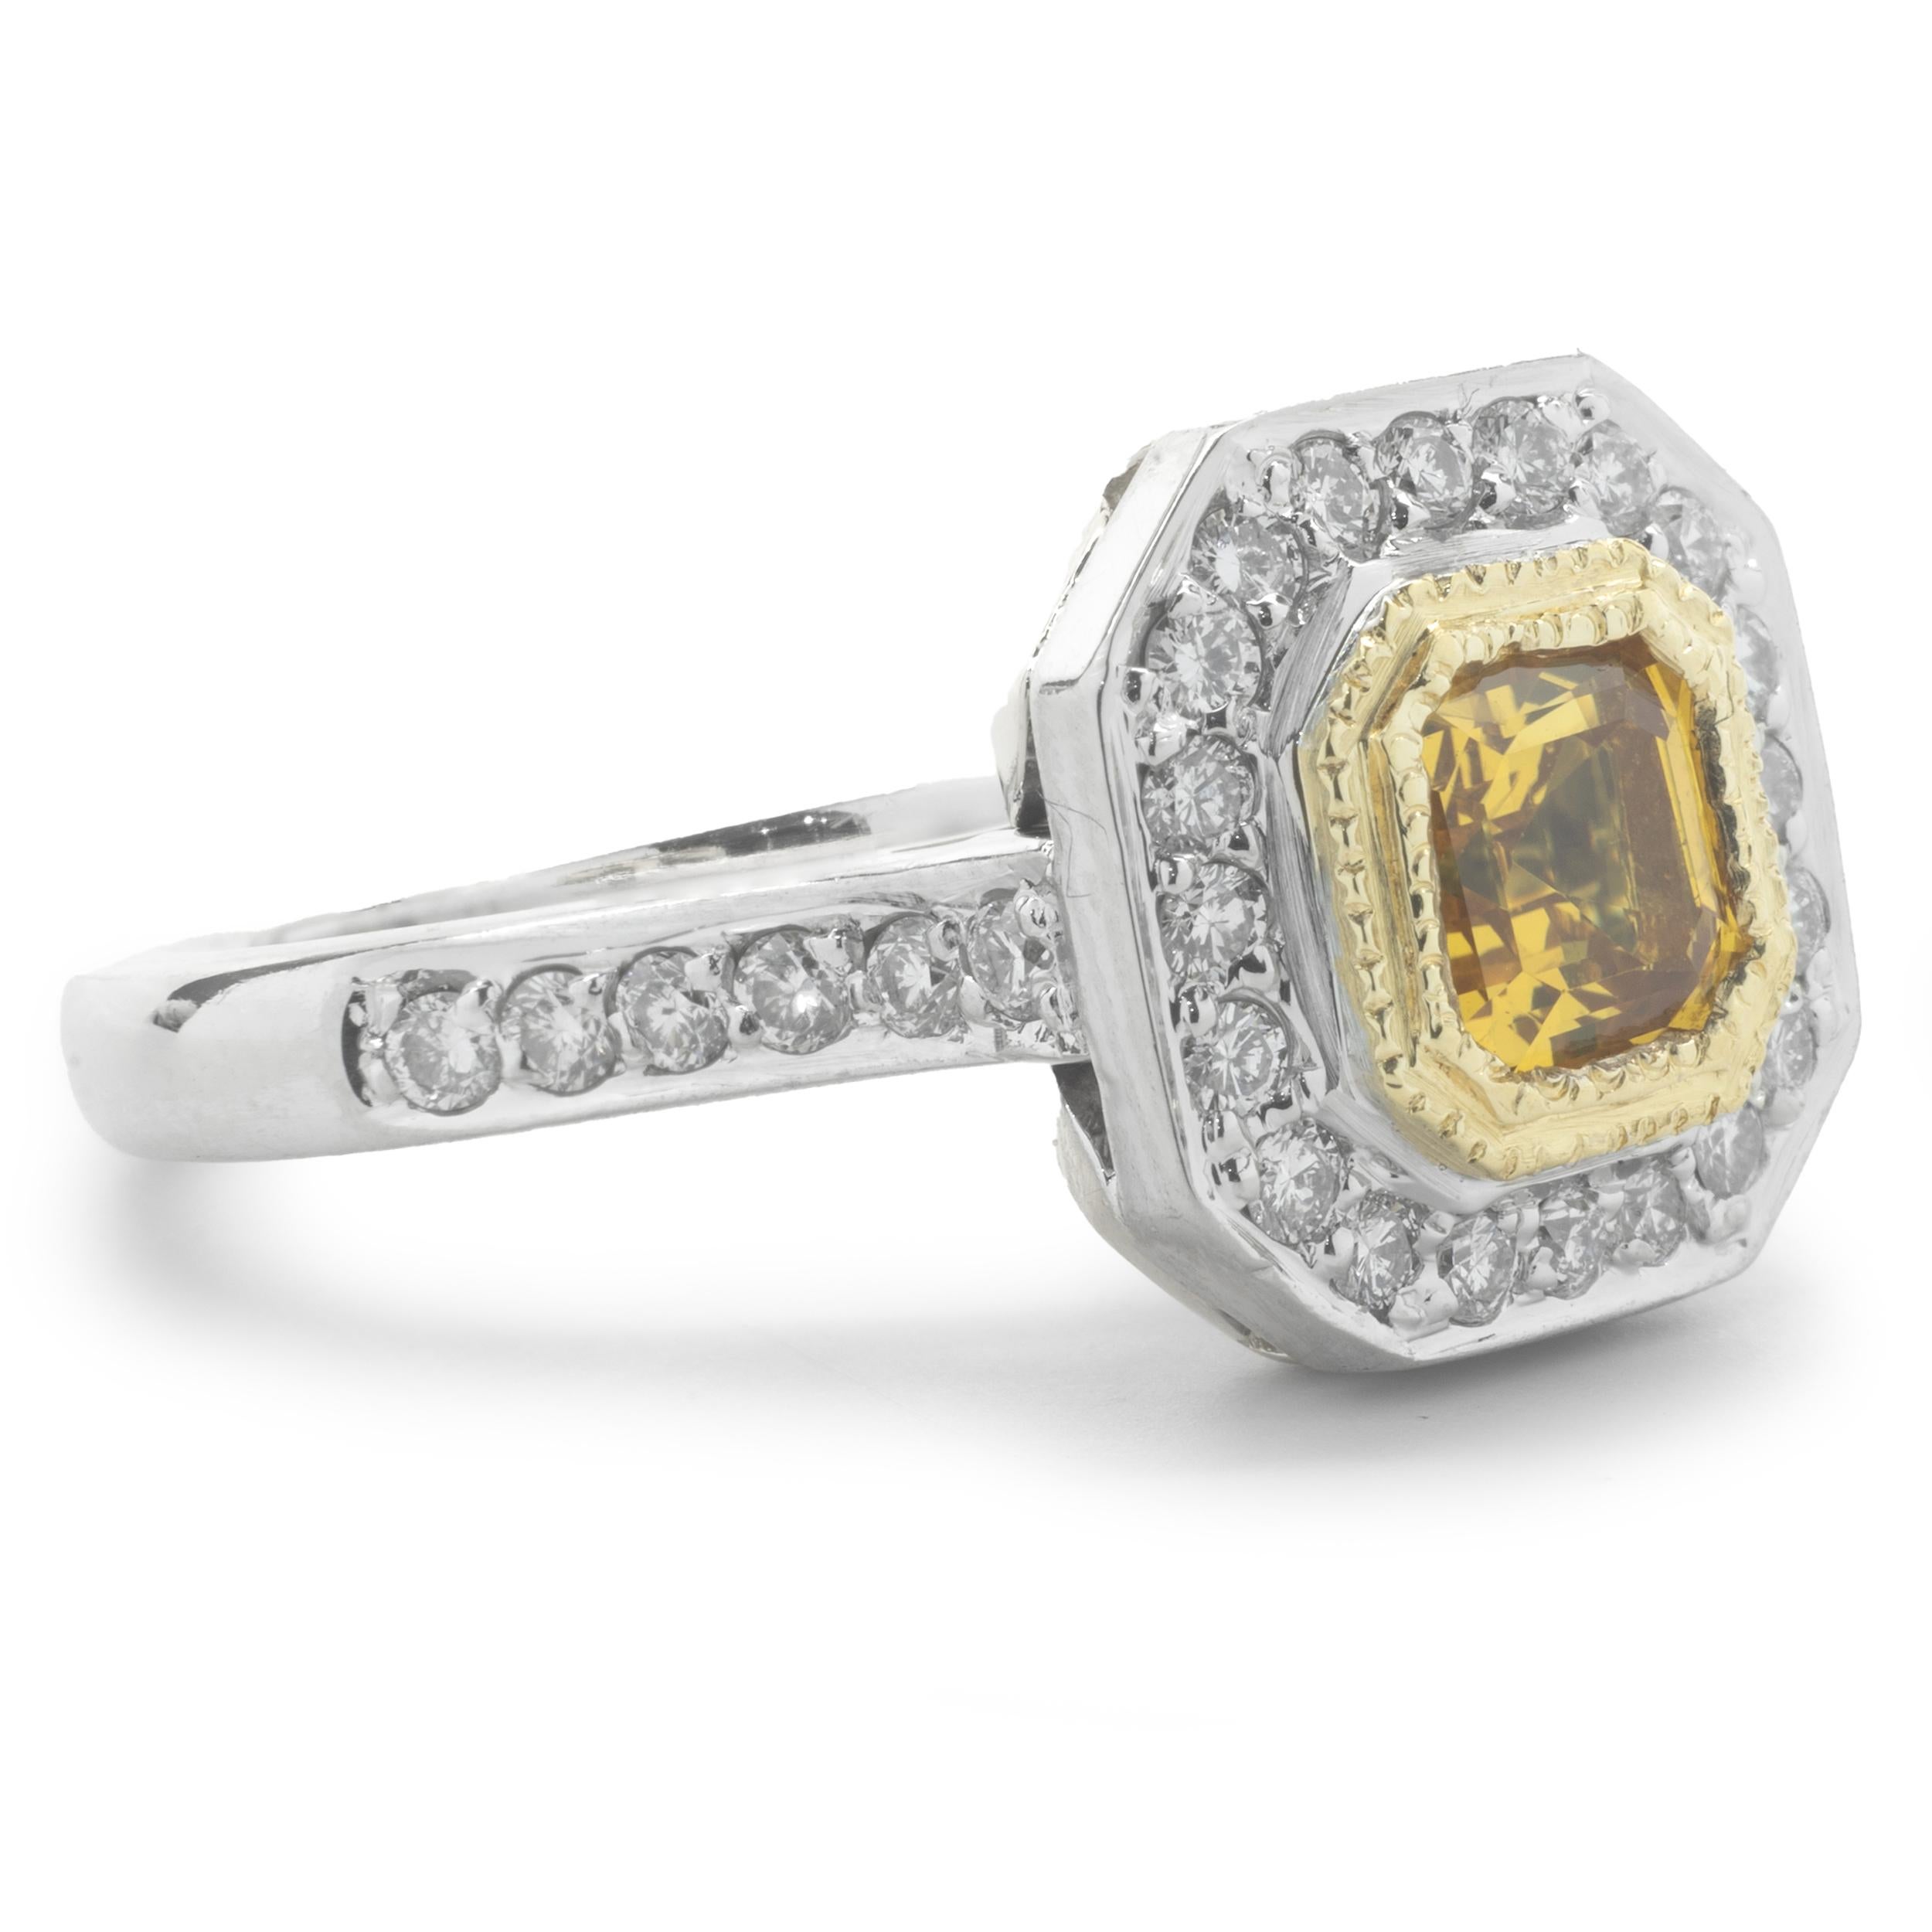 Material: 14K white gold
Diamonds: 28 round brilliant cut = .56cttw
Color: G
Clarity: SI2
Sapphire: 1 asscher cut= 0.81ct
Ring Size: 7 (allow up to two additional business days for sizing requests)
Weight: 8.15 grams
